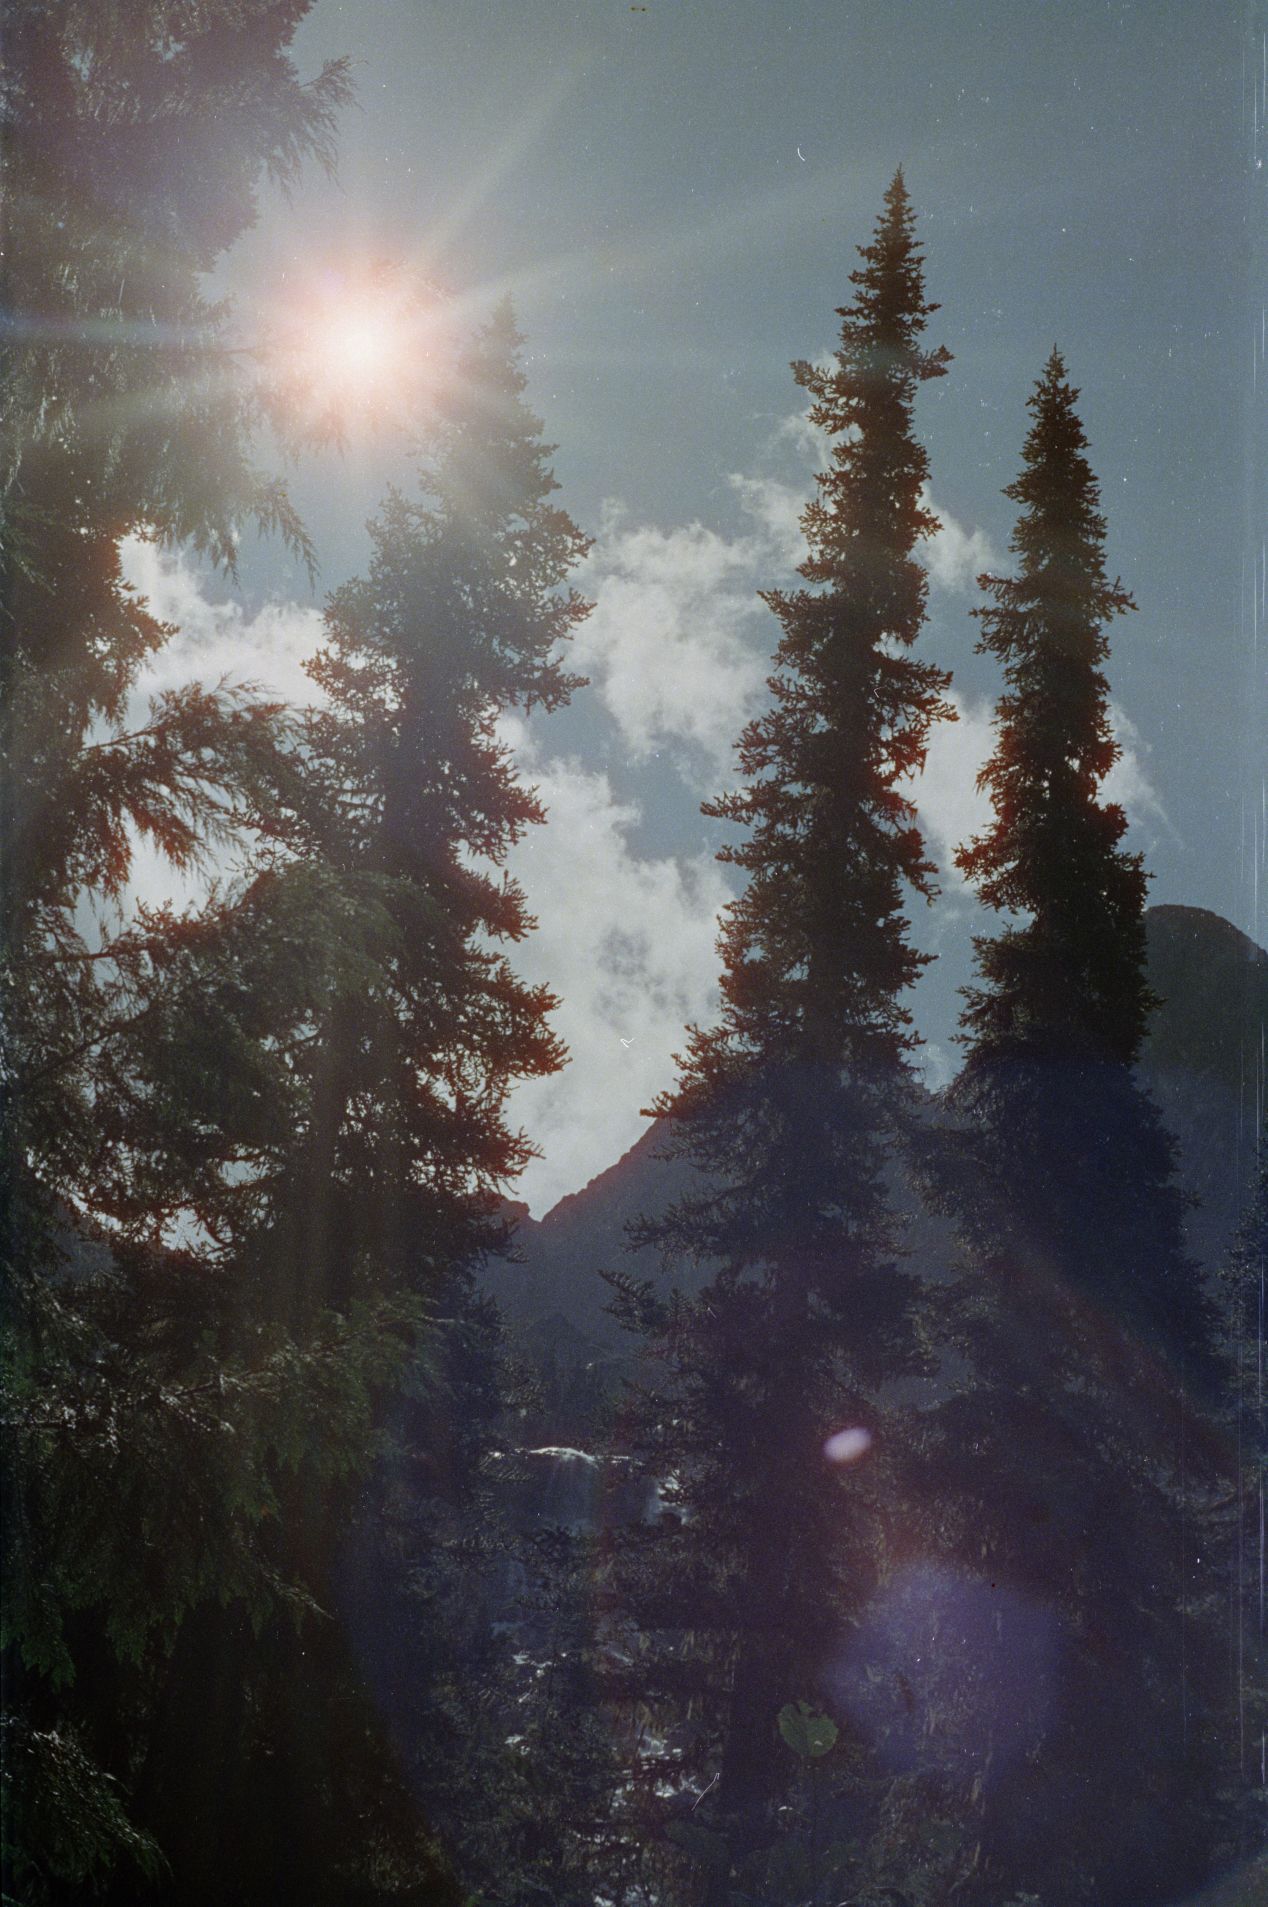 CineStill 800T is a modern Kodak emulsion with a remarkable dynamic range. In this image, the film captures details simultaneously in the tree shadow and within the sunburst without any banding or extreme distortions. If you subscribe to the film latitude definition in this article, you’ll notice plenty of it in this emulsion’s ability to gradually fade regions out of its dynamic range into pure whites and pitch blacks.